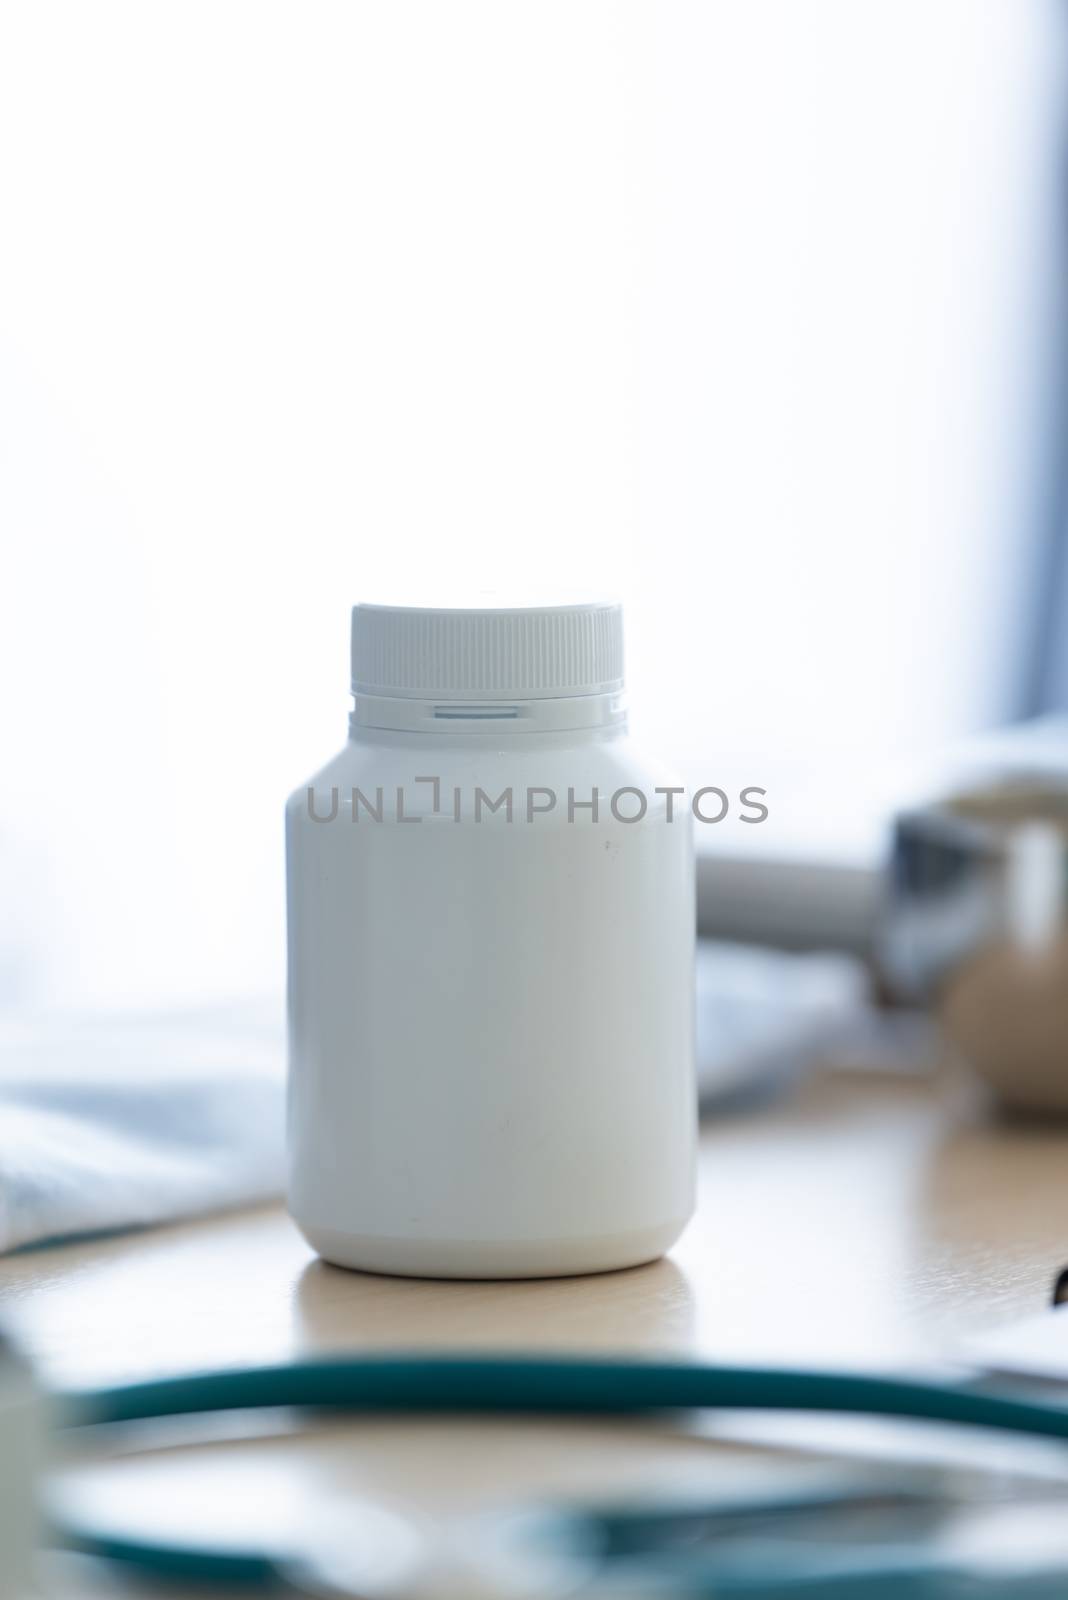 A white medicine bottle on the table.